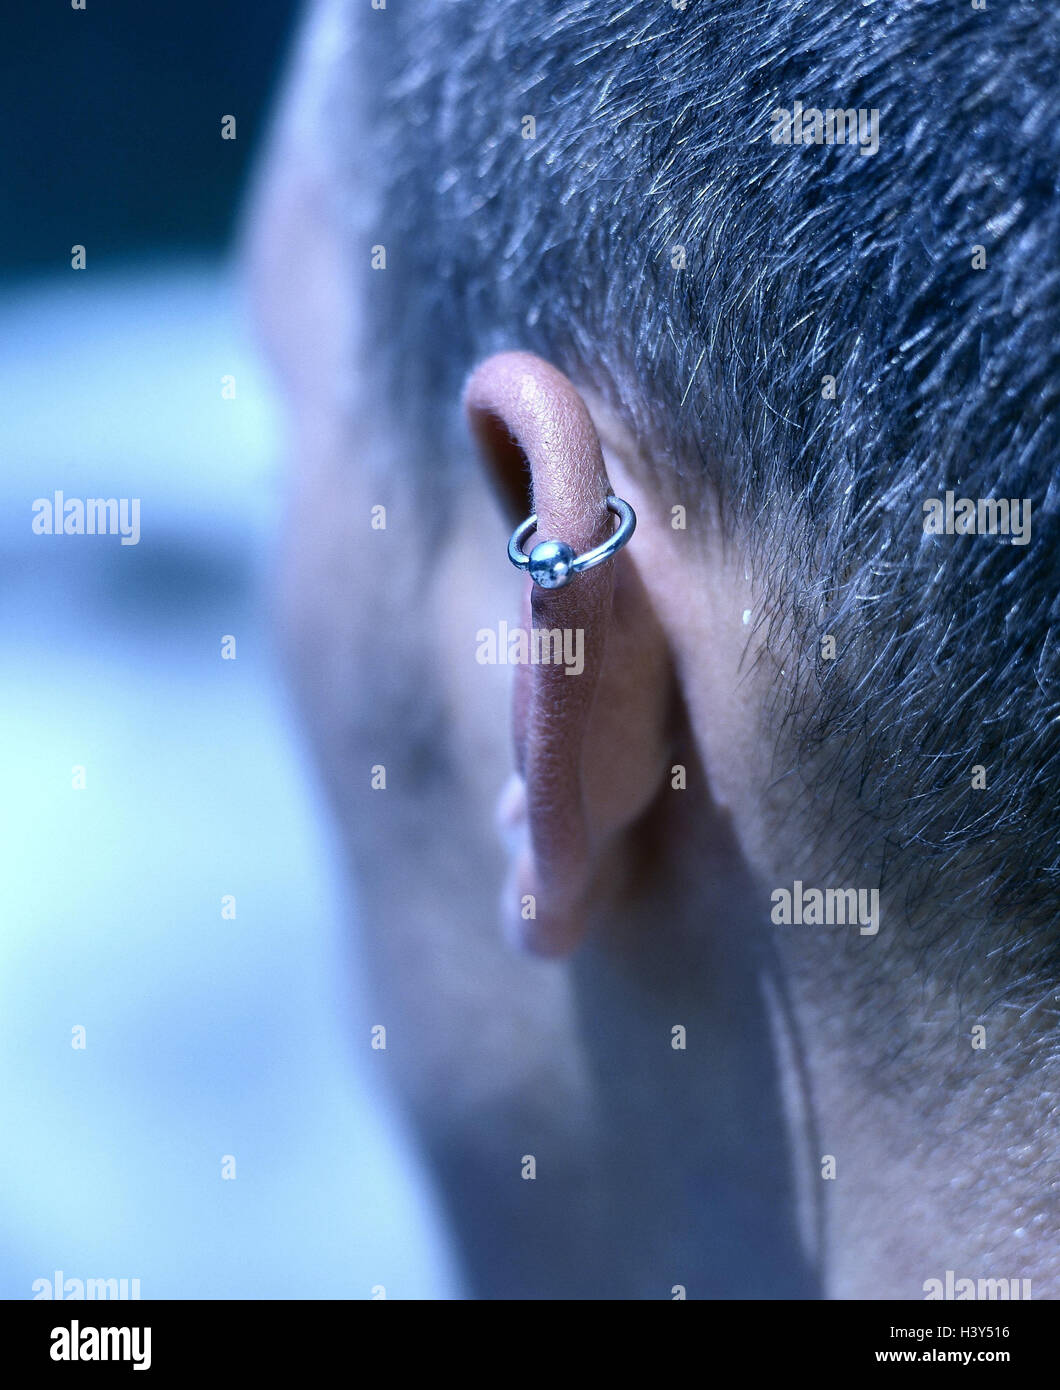 Ear Piercing Helix High Resolution Stock Photography and Images - Alamy